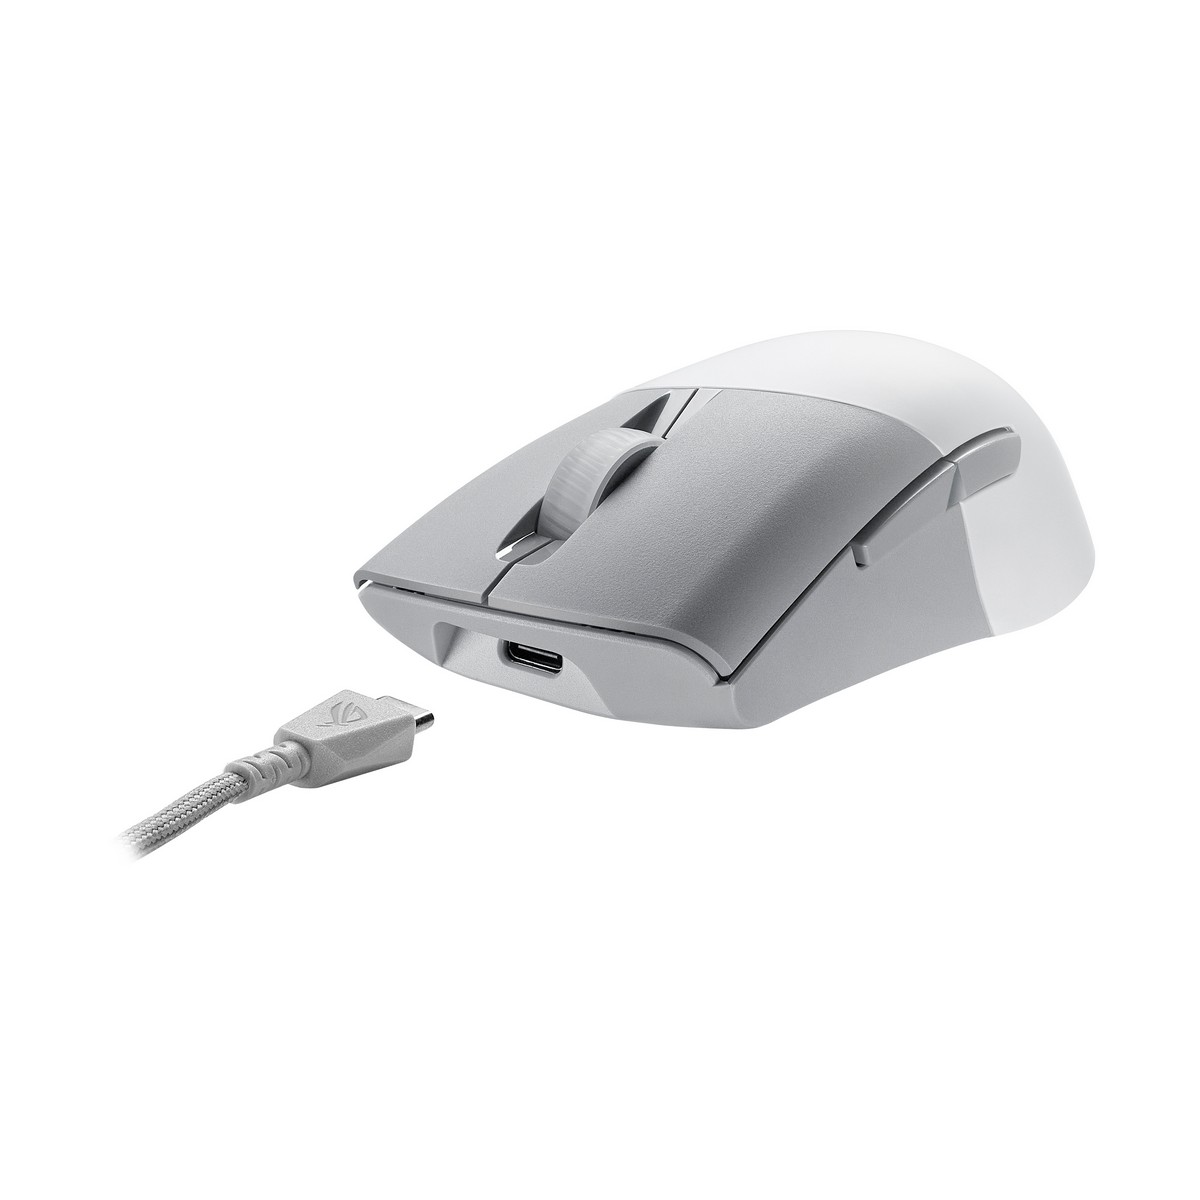 Asus - ASUS ROG Keris Wireless Aimpoint Wireless Gaming Mouse - White (90MP02V0-BMUA10)